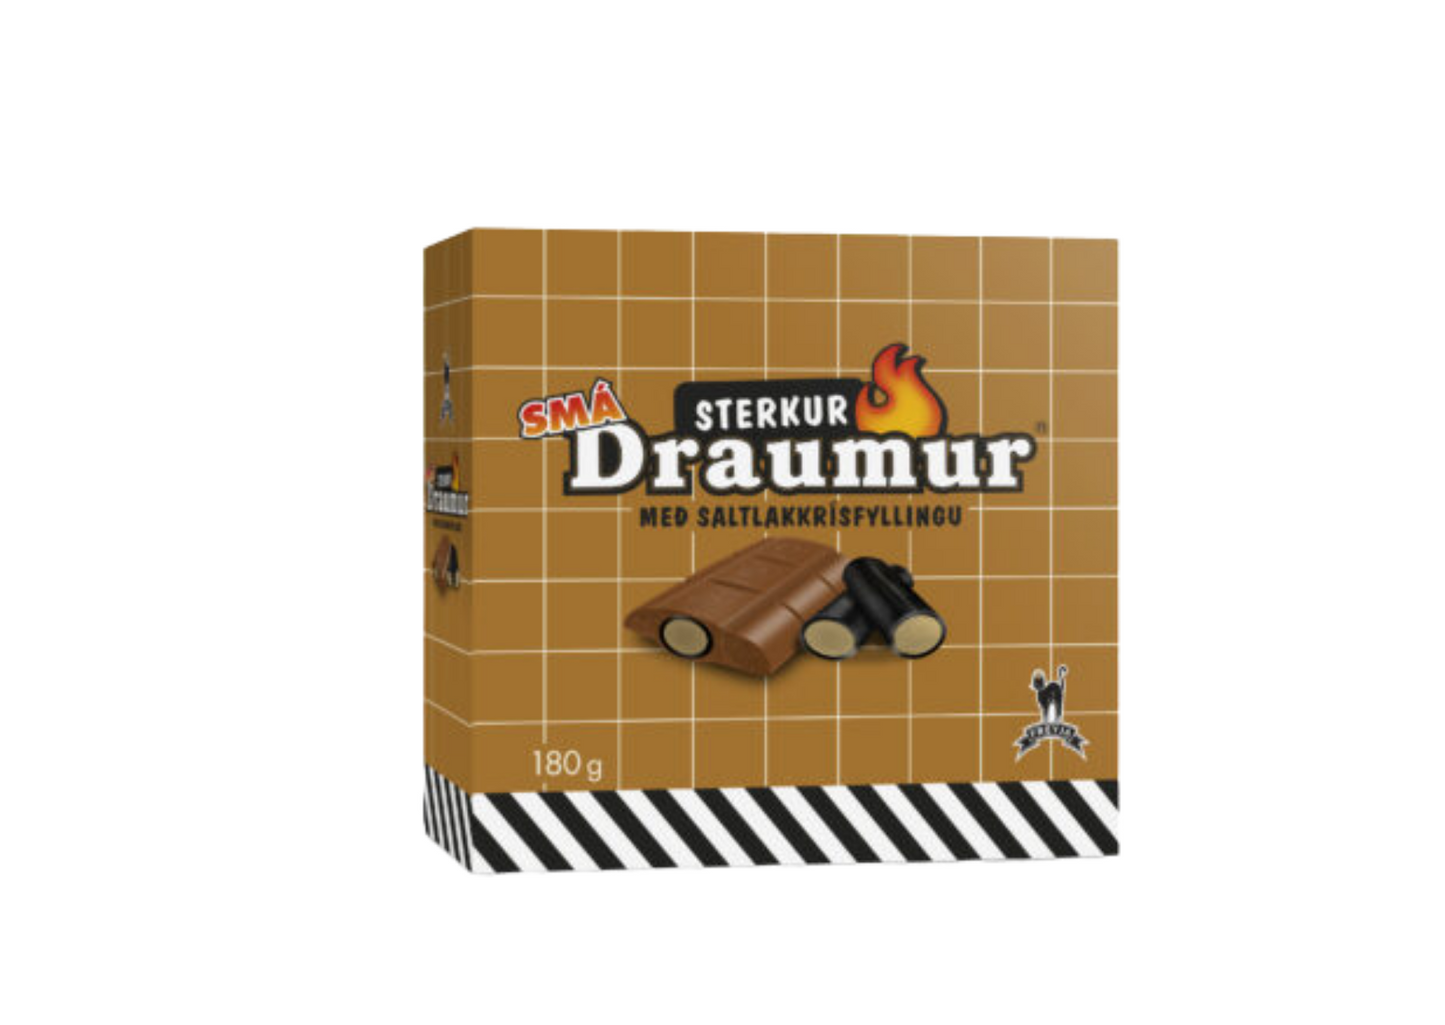 Smá Draumur. Strong Dream - Small chocolate bars with strong peppery salt licorice filling inside. - Topiceland